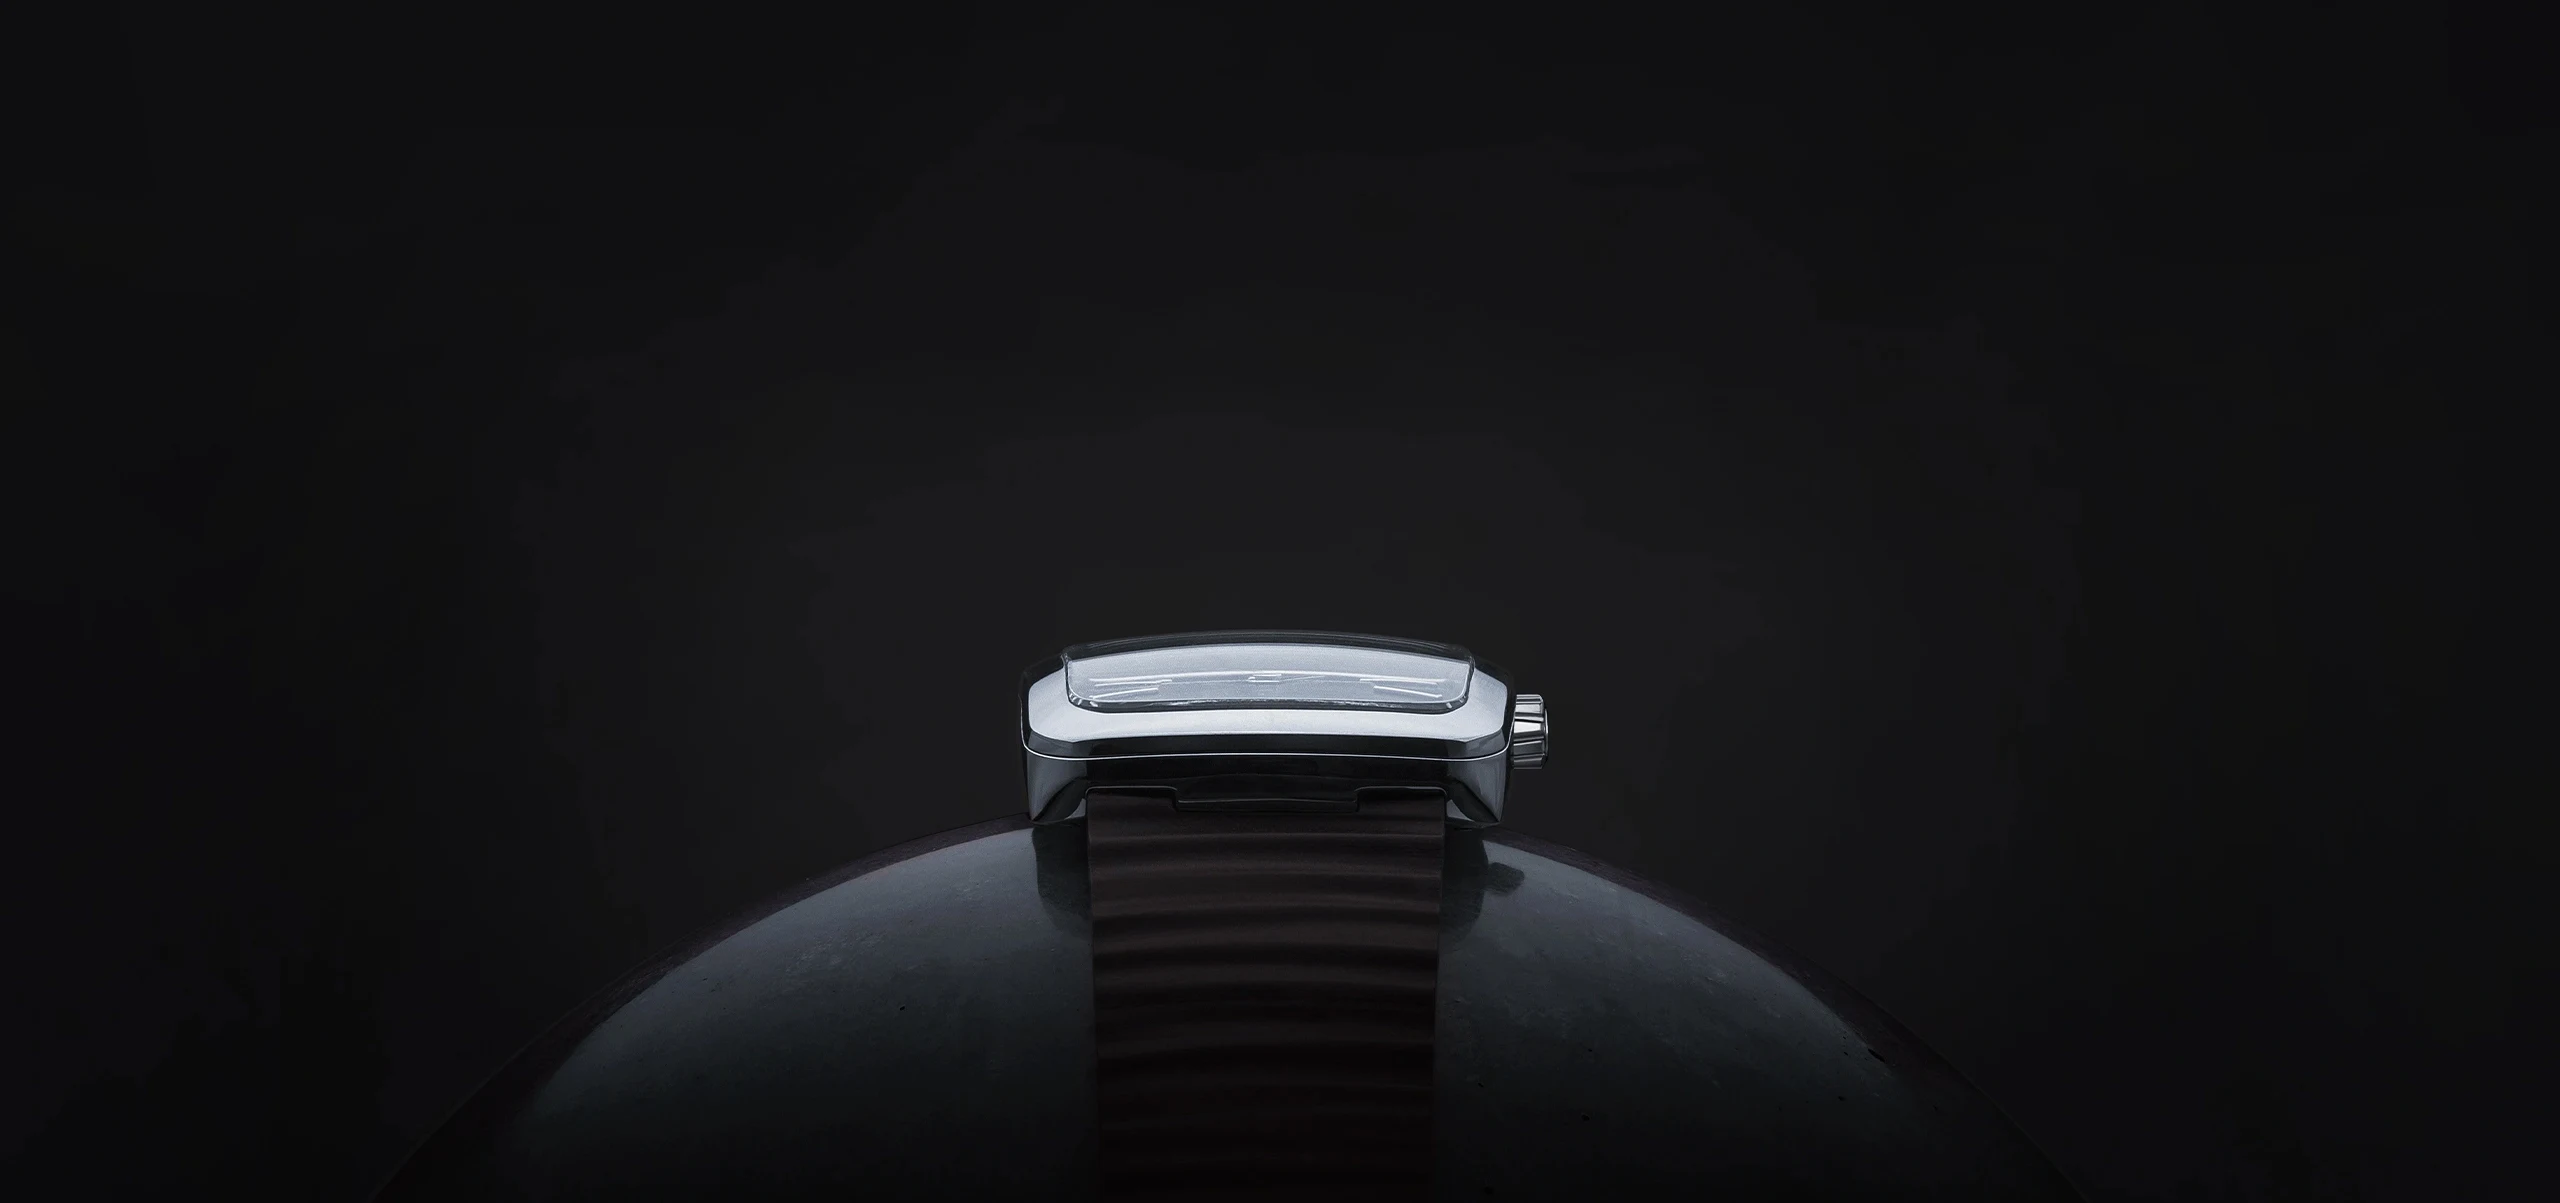 generative design luxury watch concept by groen and boothman